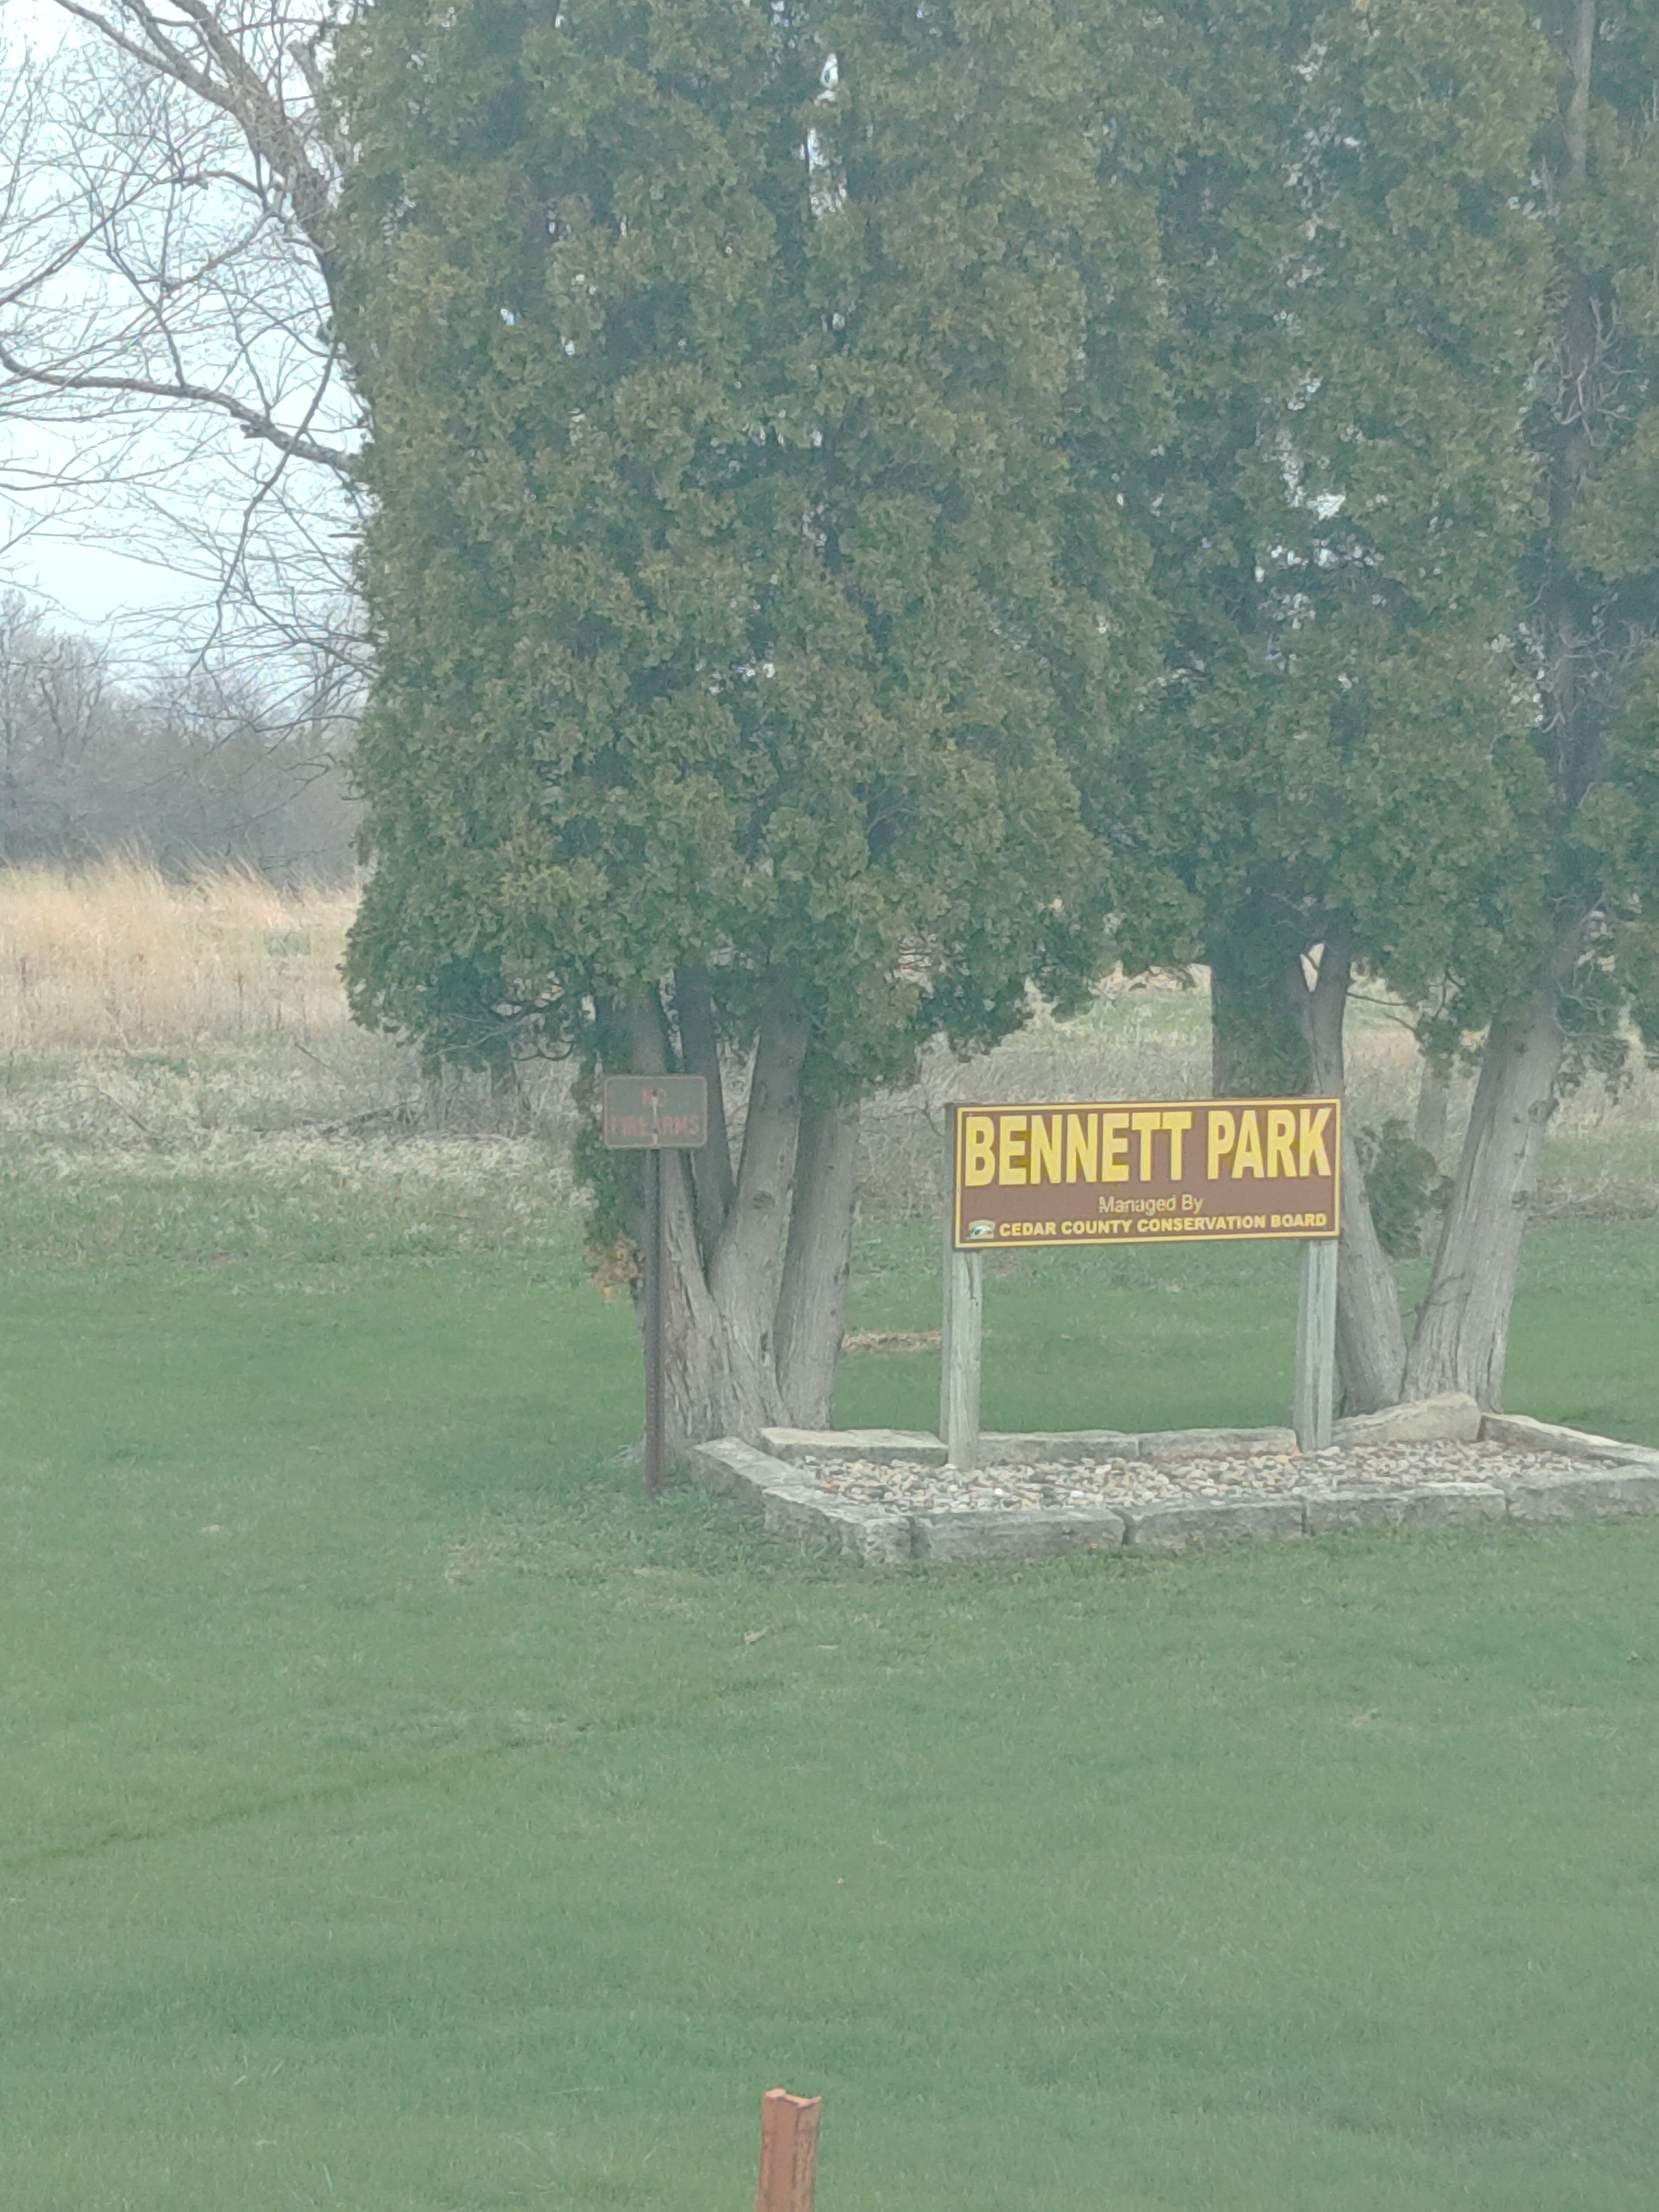 Camper submitted image from Bennett Park - 2